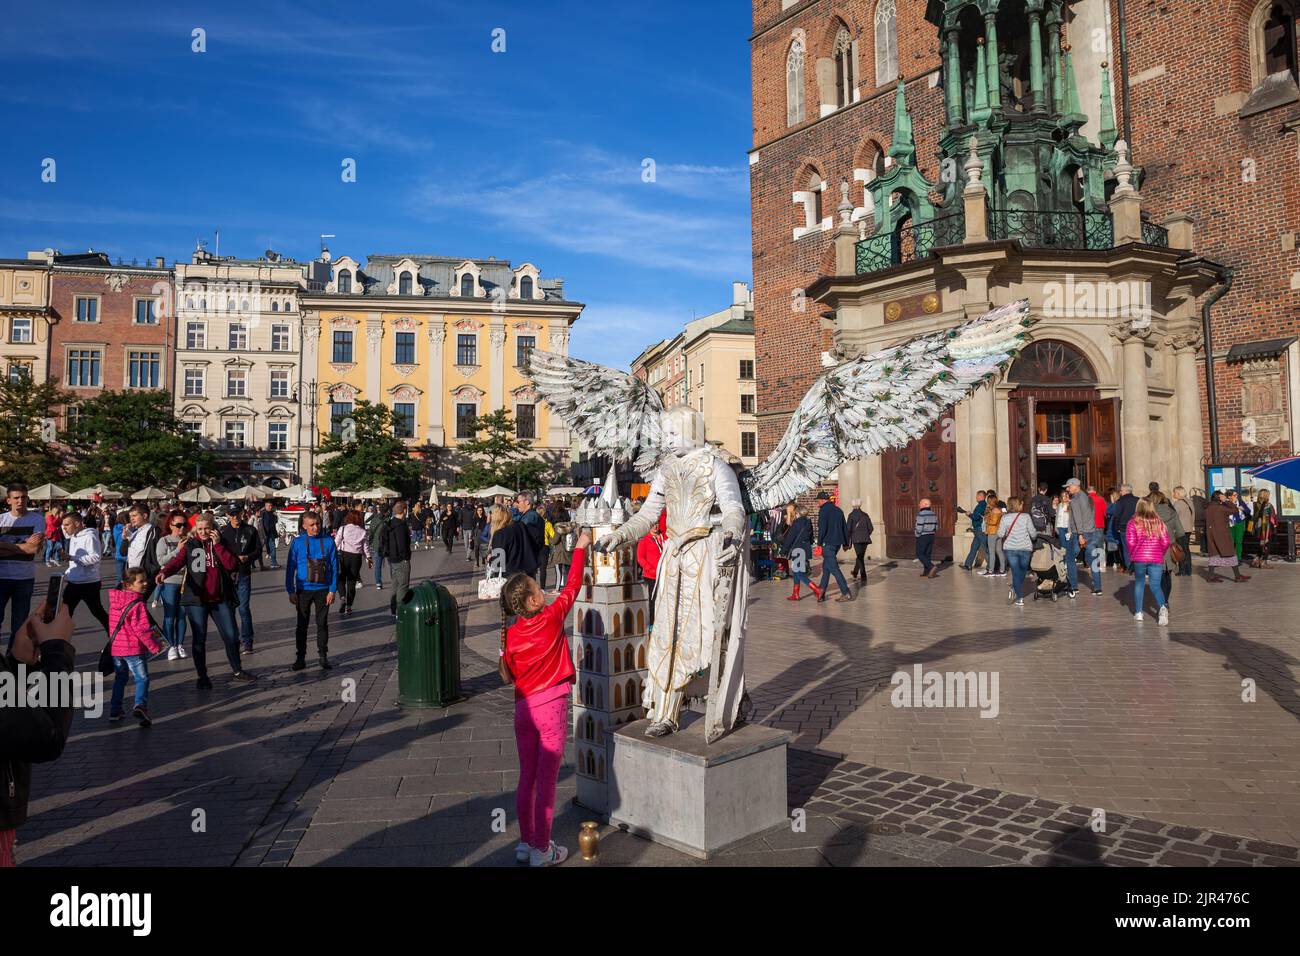 Krakow (Cracow), Poland - September 30, 2018: Group of people and child giving money to angel mime on lively main square in the Old Town in front of S Stock Photo